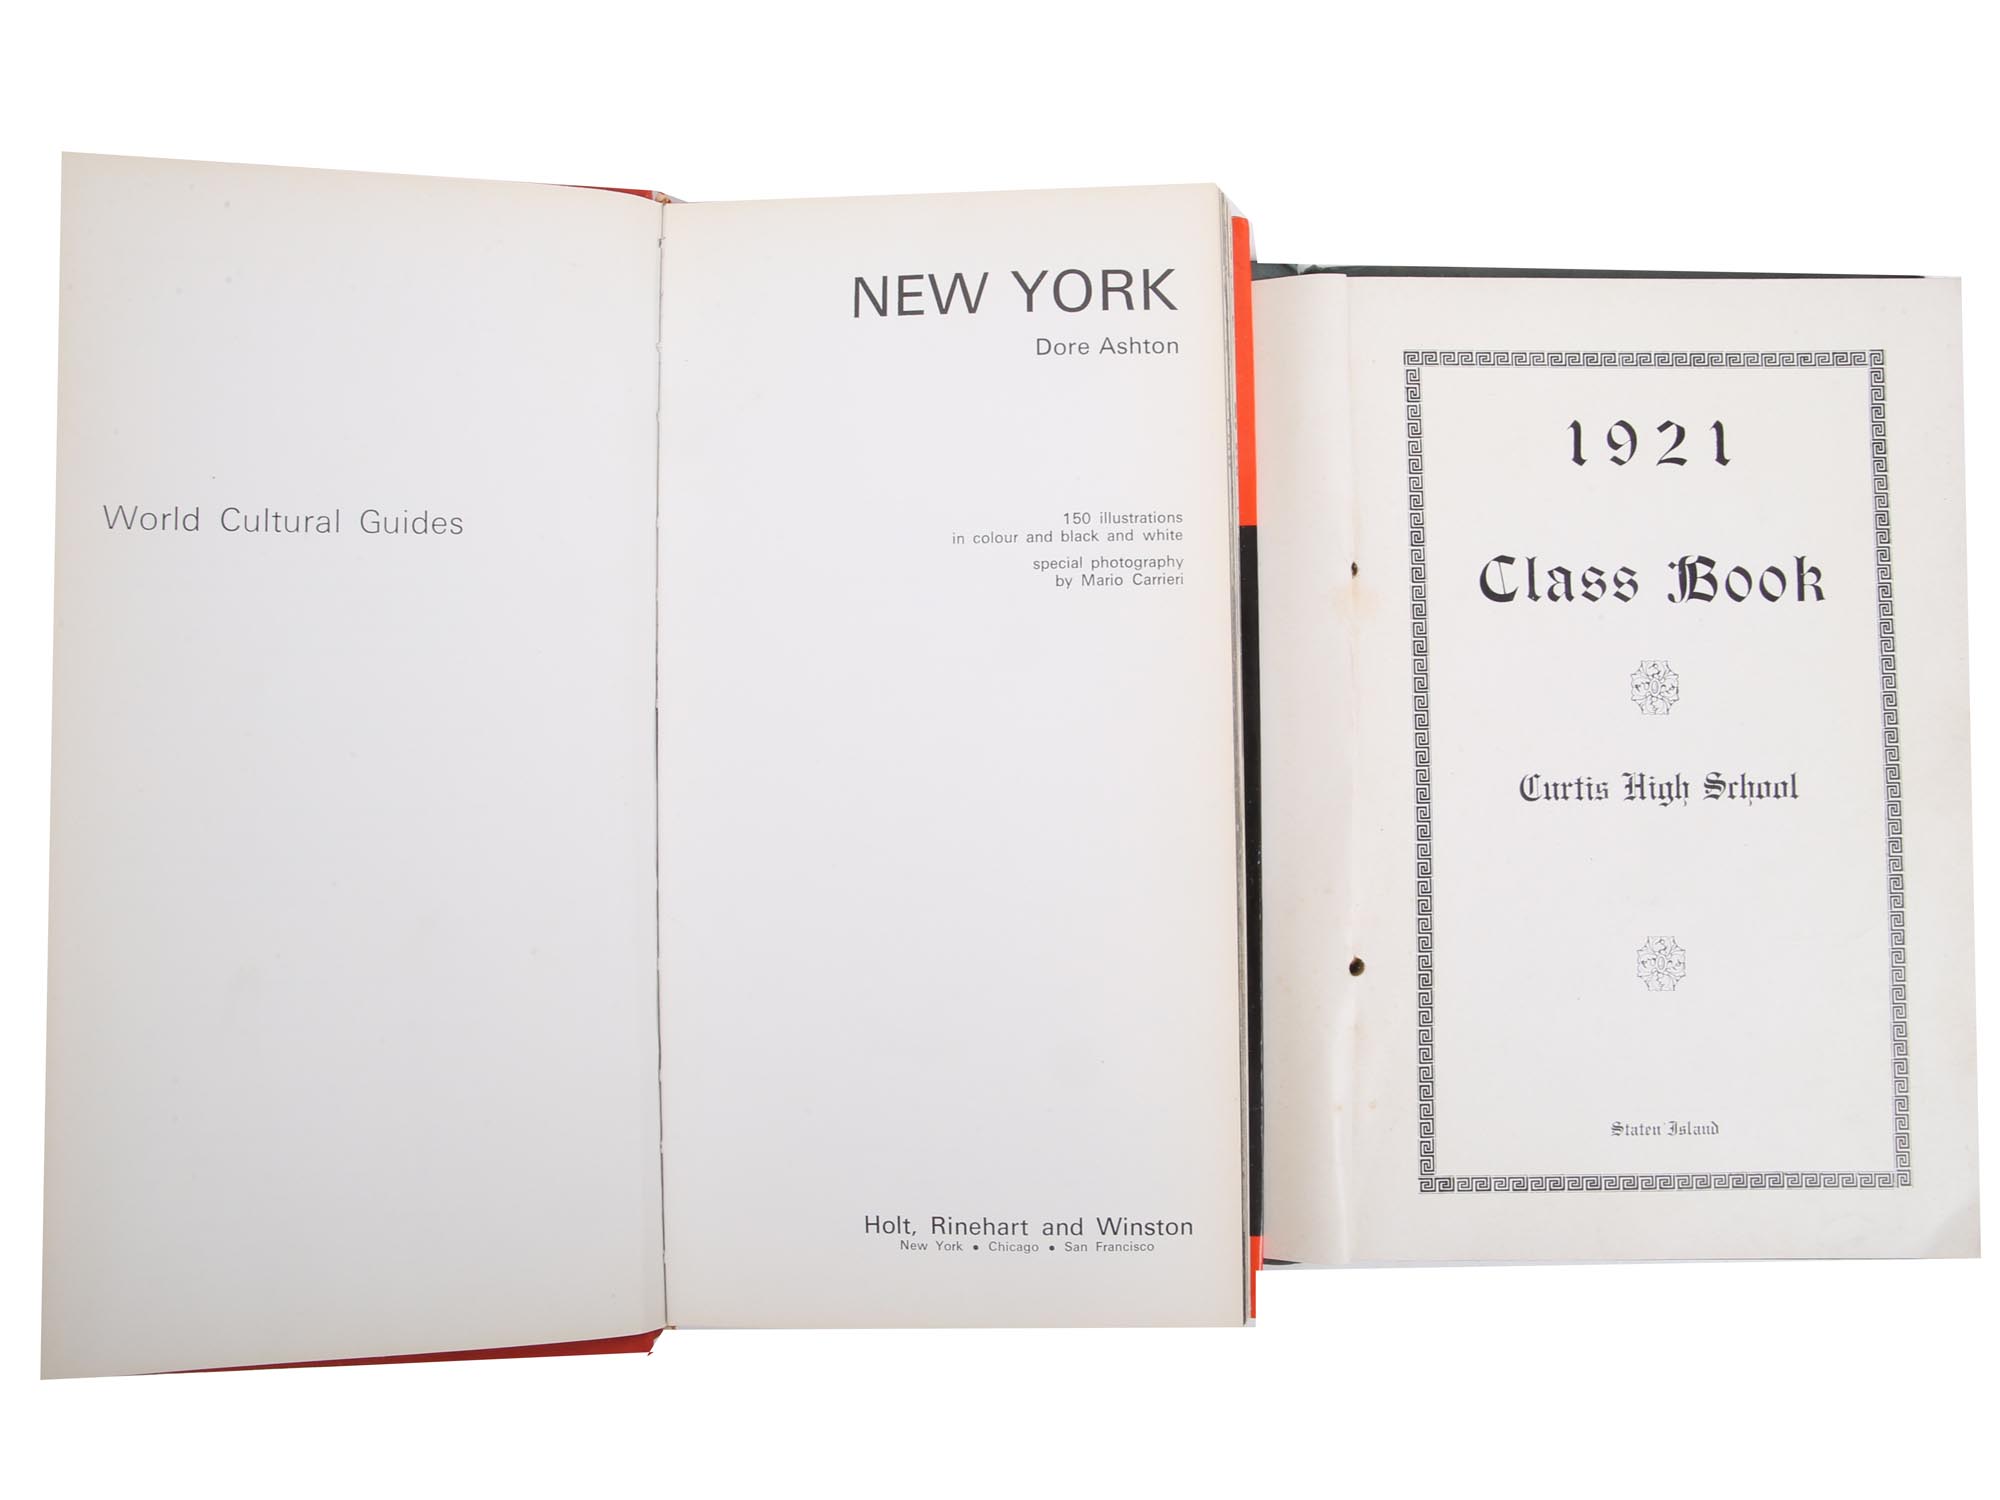 VINTAGE NEW YORK BOOK EDITION COLLECTION PIC-8